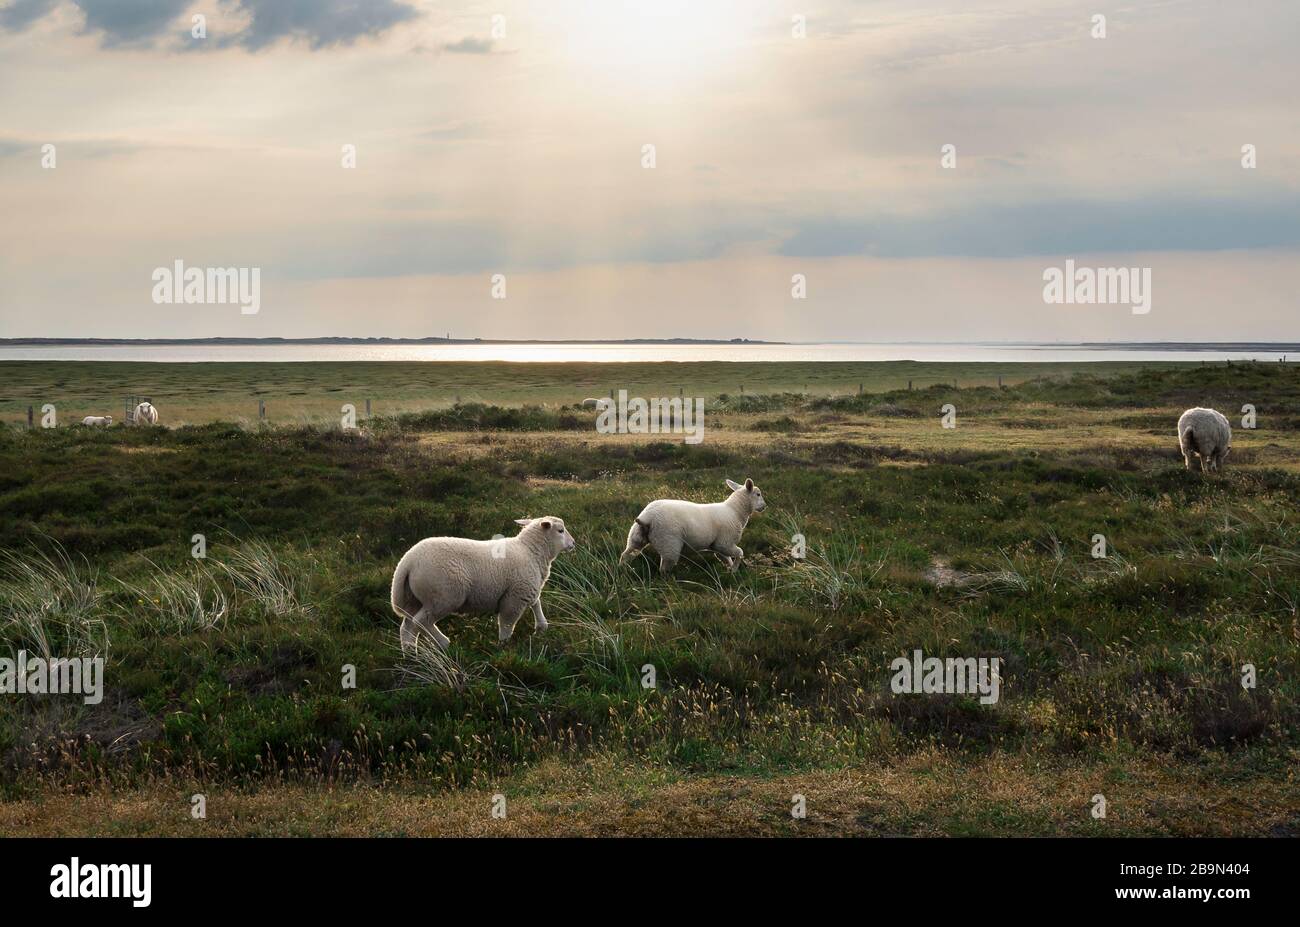 Sylt island landscape at sunrise with lambs running through moss. Lambs jumping and romping on pasture. Stock Photo